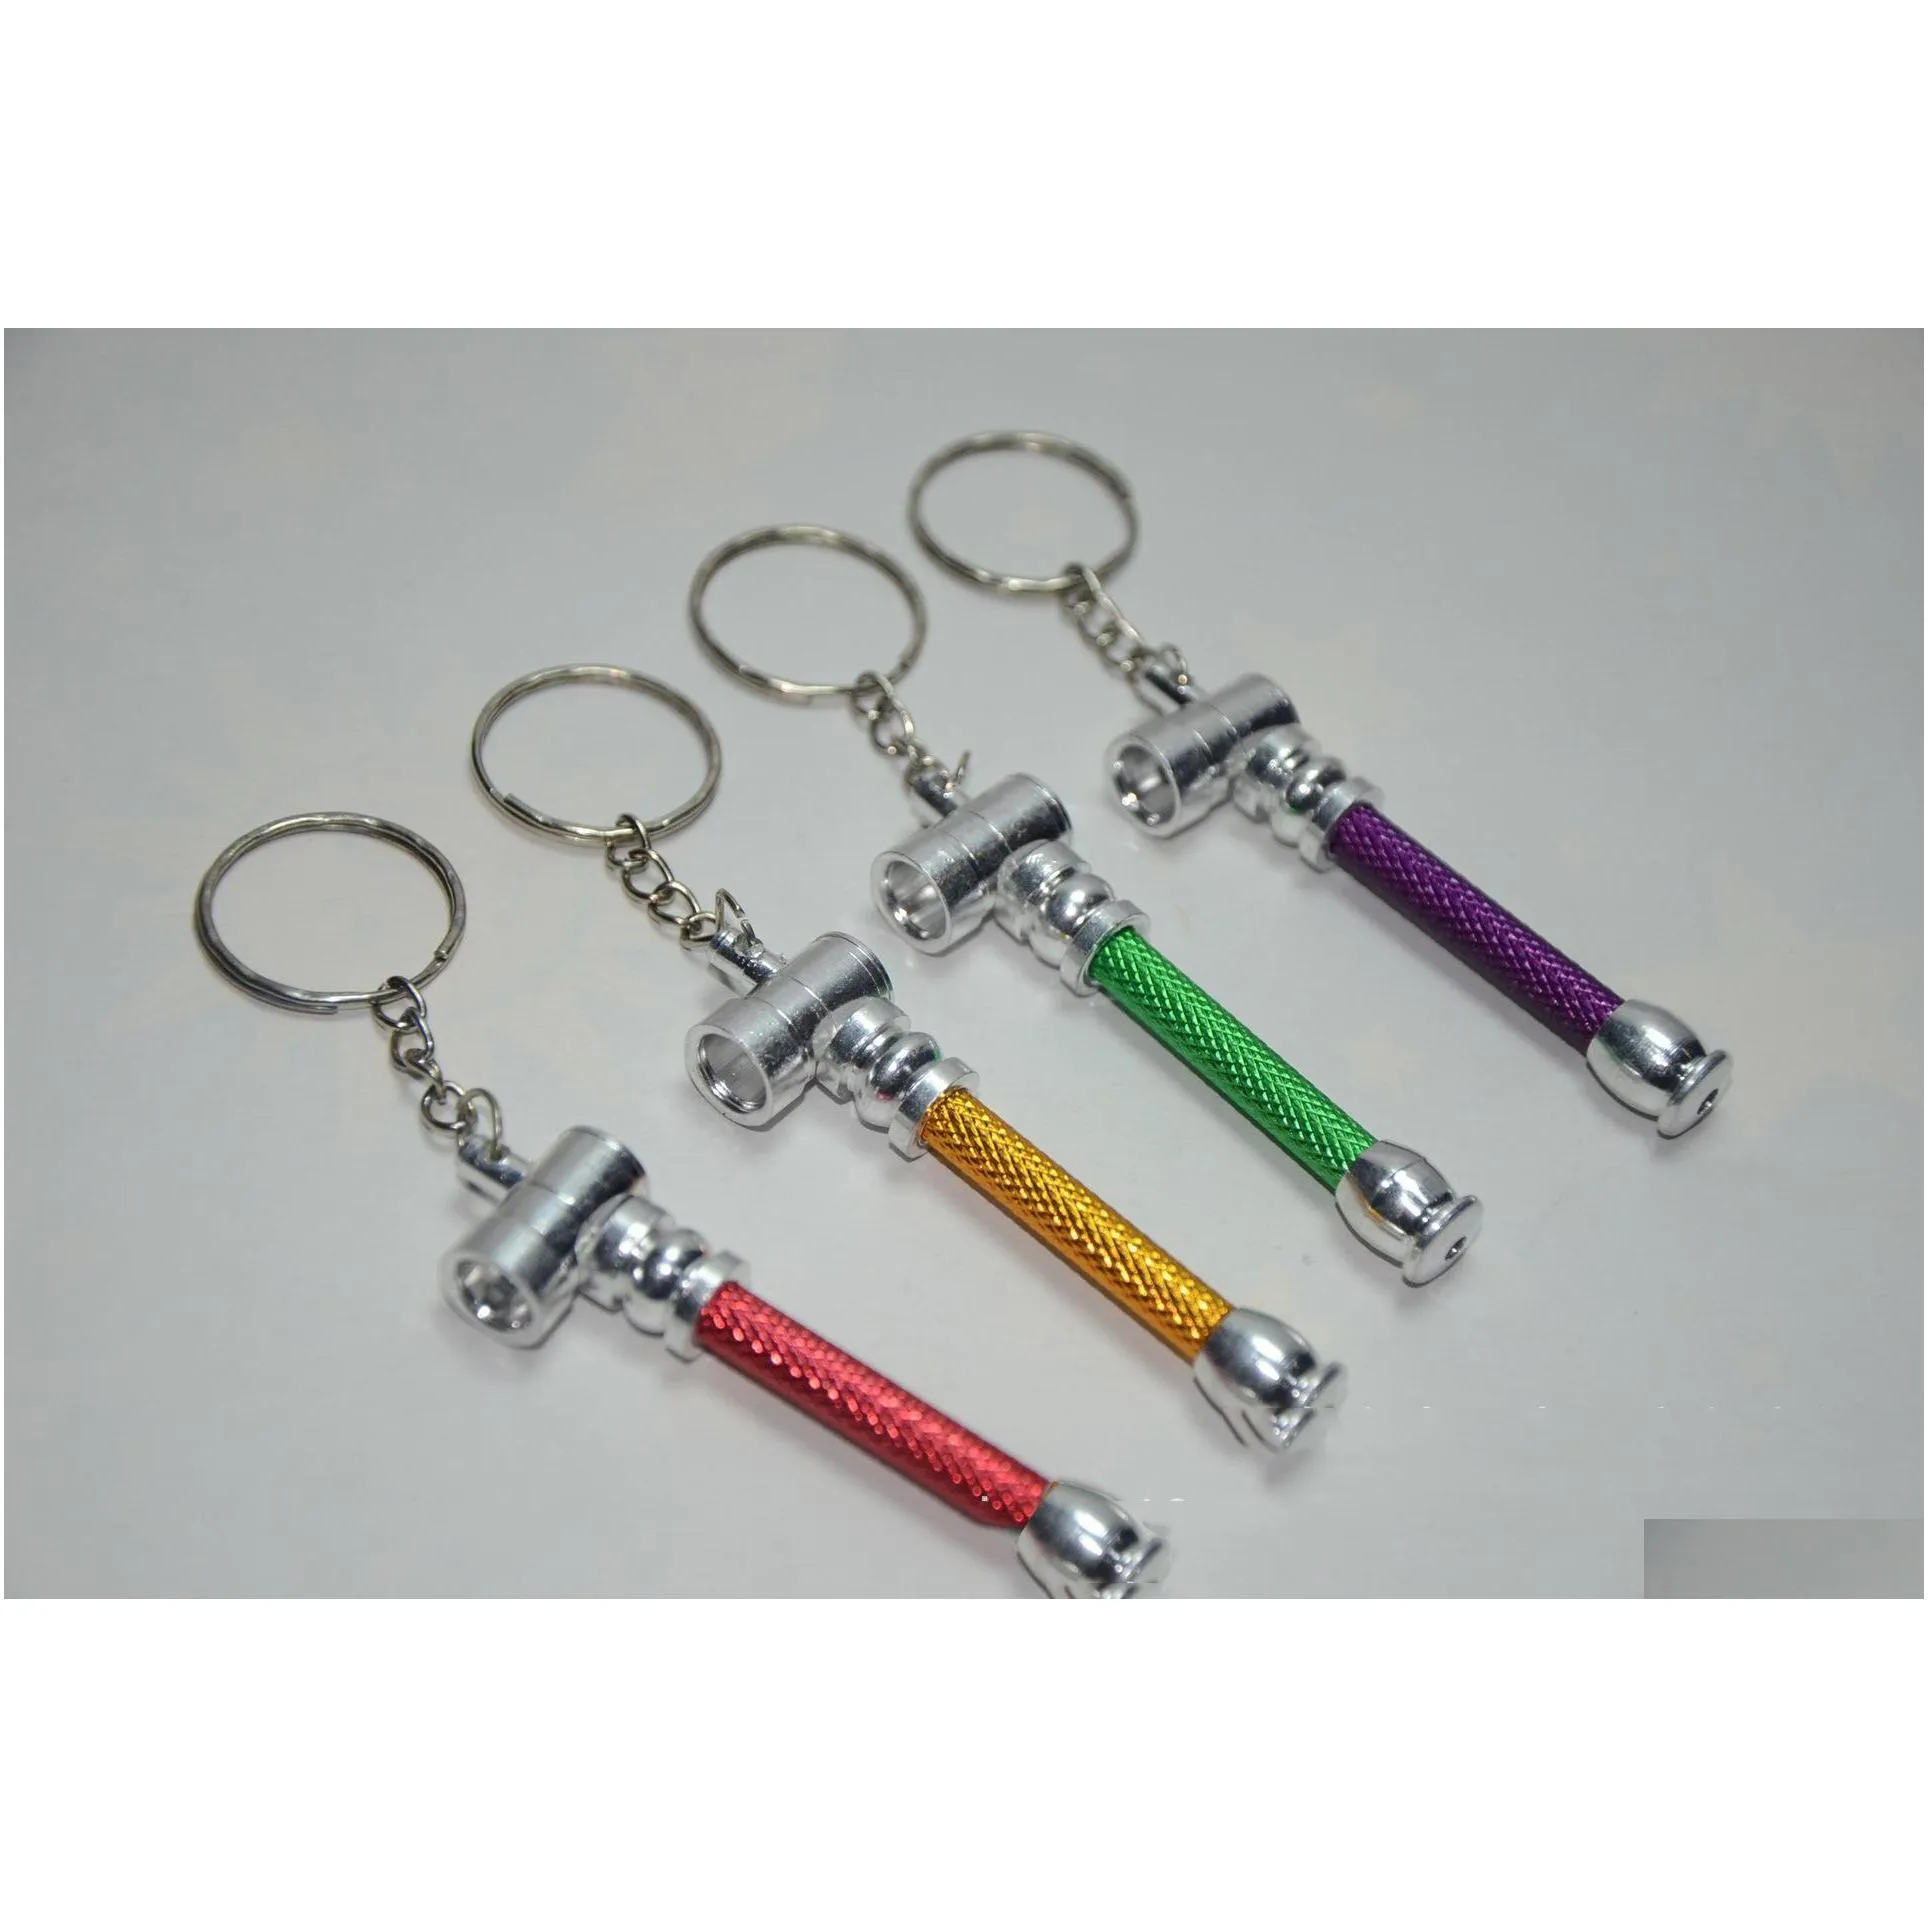 creative smoke metal pipes with key chain portable smoking pipe herb tobacco pipes smoking accessories tools random color wvt0160